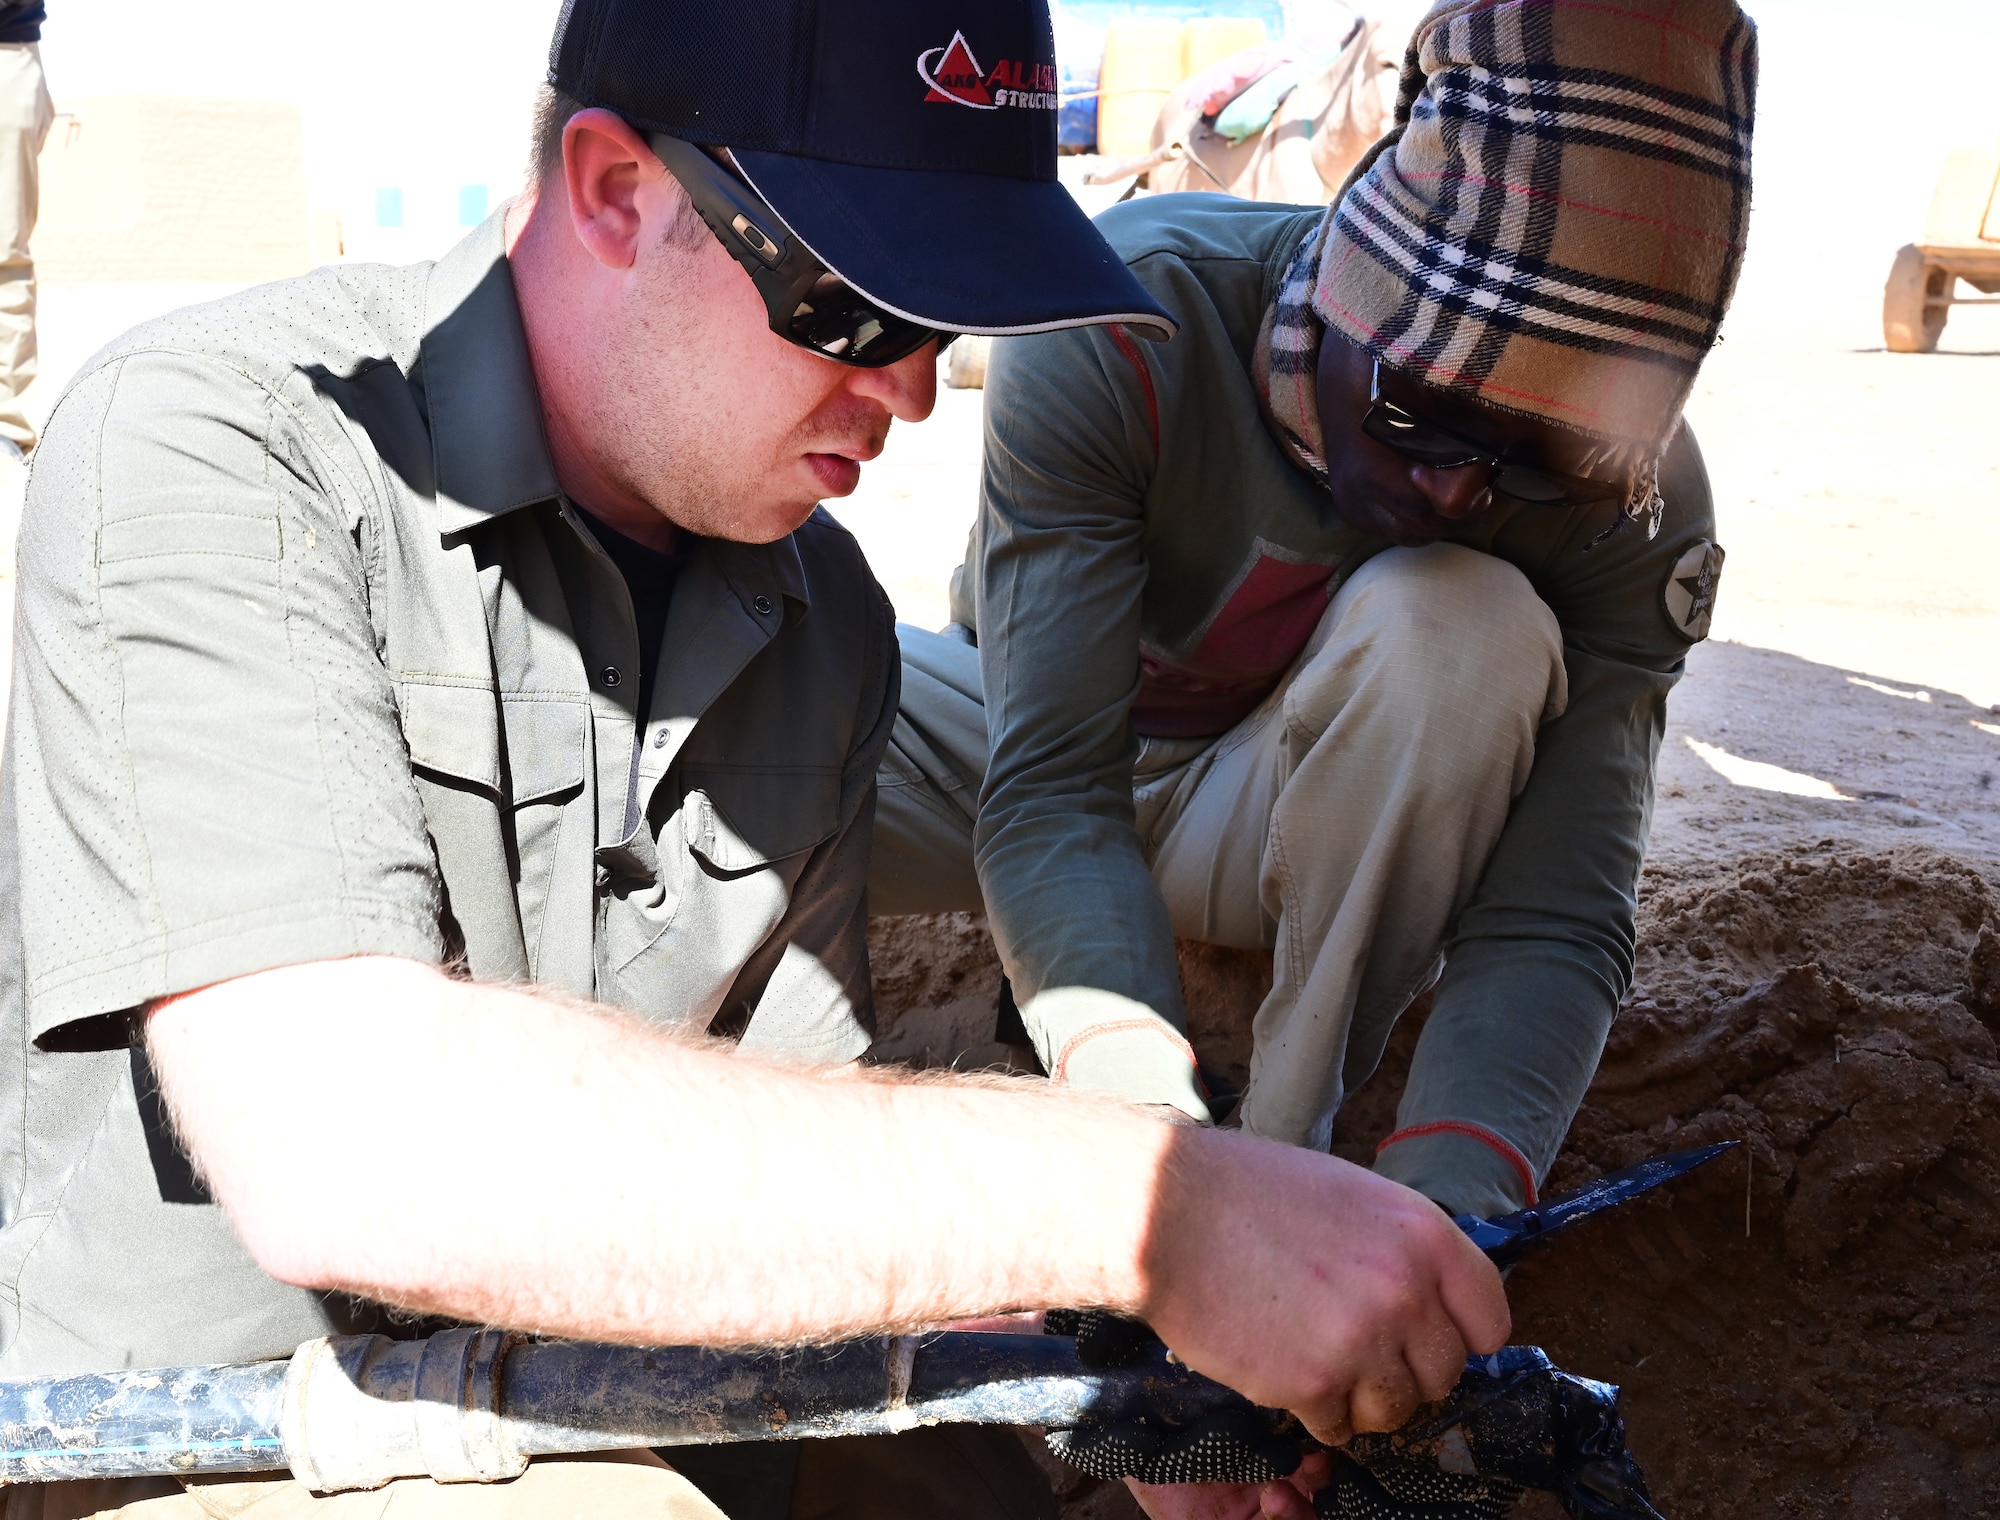 U.S. Air Force Staff Sgt. Forrest Hutchins, 724th Expeditionary Air Base Squadron civil engineering flight, teaches plumbing skills to Nigerien Armed Forces (French language: Forces Armées Nigeriennes) action civil military (ACM) member while repairing a waterline leaks in the village of Alwat, Agadez, Niger, Jan. 22, 2022. Joint projects with the FAN AMC increases future collaboration in Alwat and improves relationships between the civilian leaders, FAN and the U.S. (U.S. Air Force photo by Tech. Sgt. Stephanie Longoria)